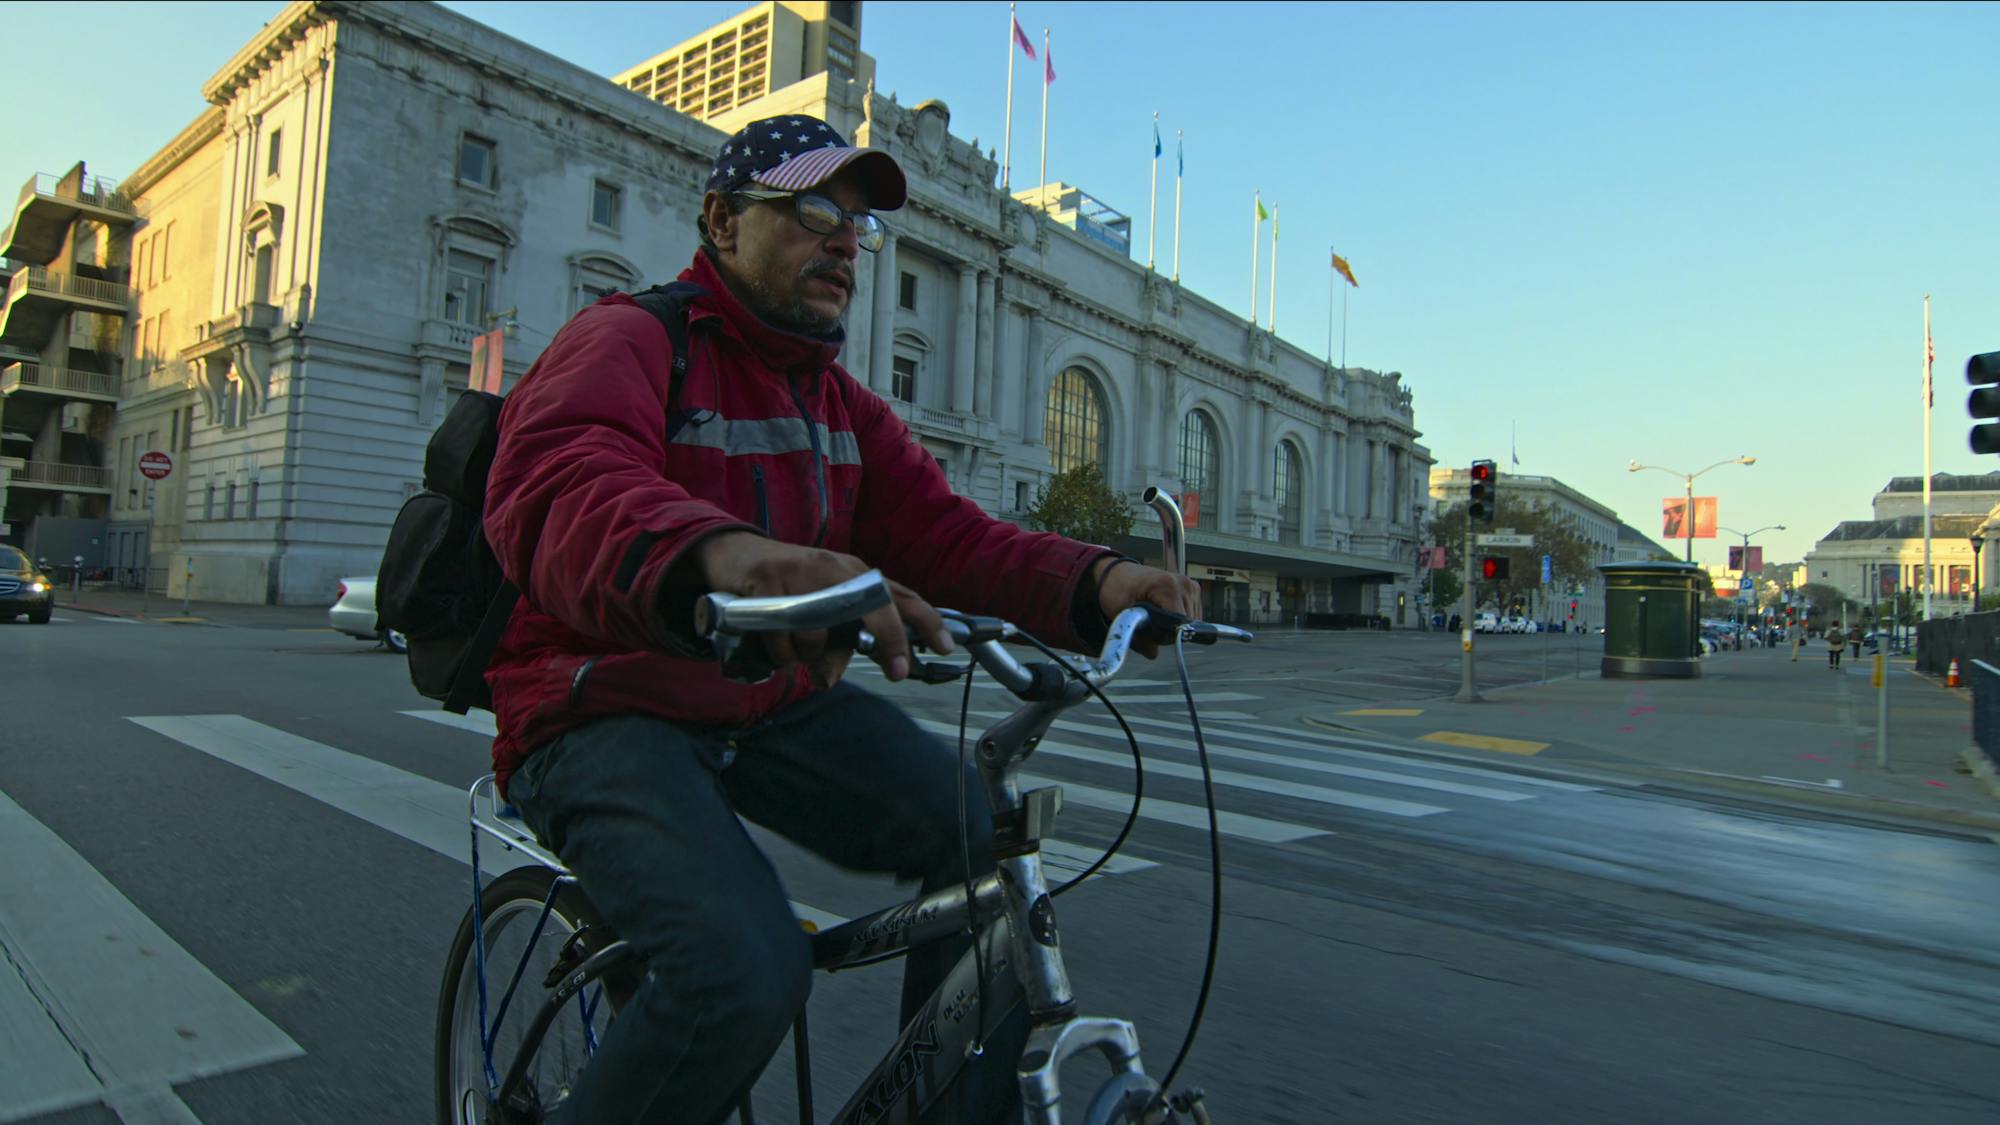 Luis Rivera Miranda  wears grey pants and a red sweater. He bikes through a street with a old building behind him.